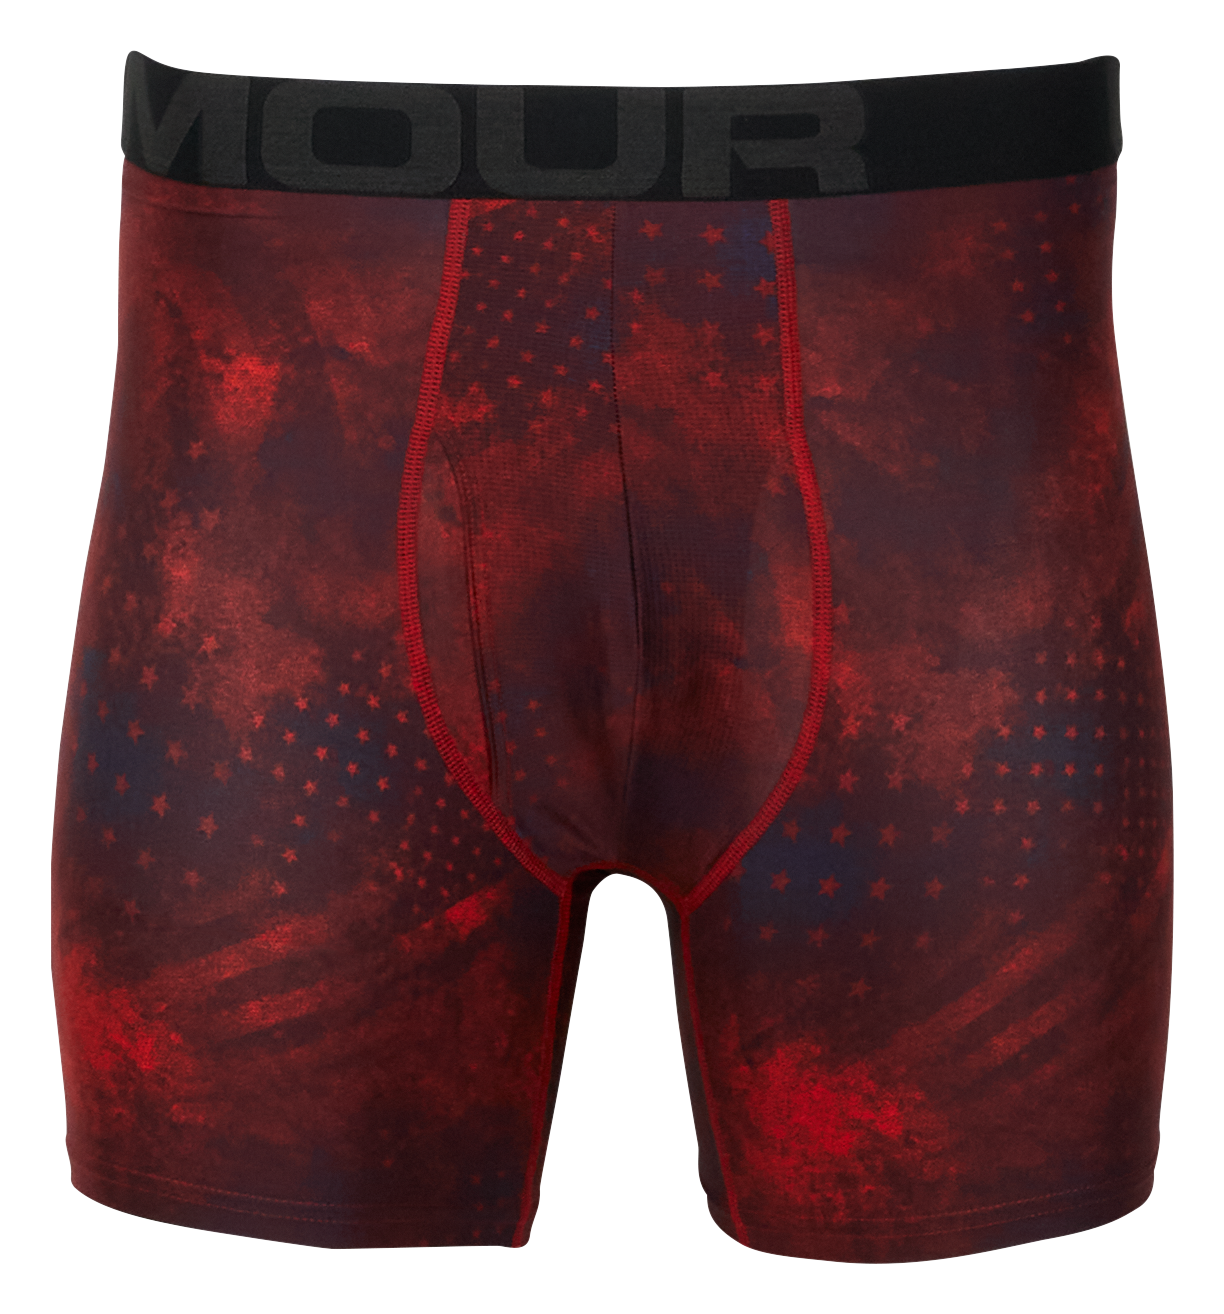 Under Armour Tech 6"" Patterned Boxerjock Shorts for Men - Red/Jet Gray - S